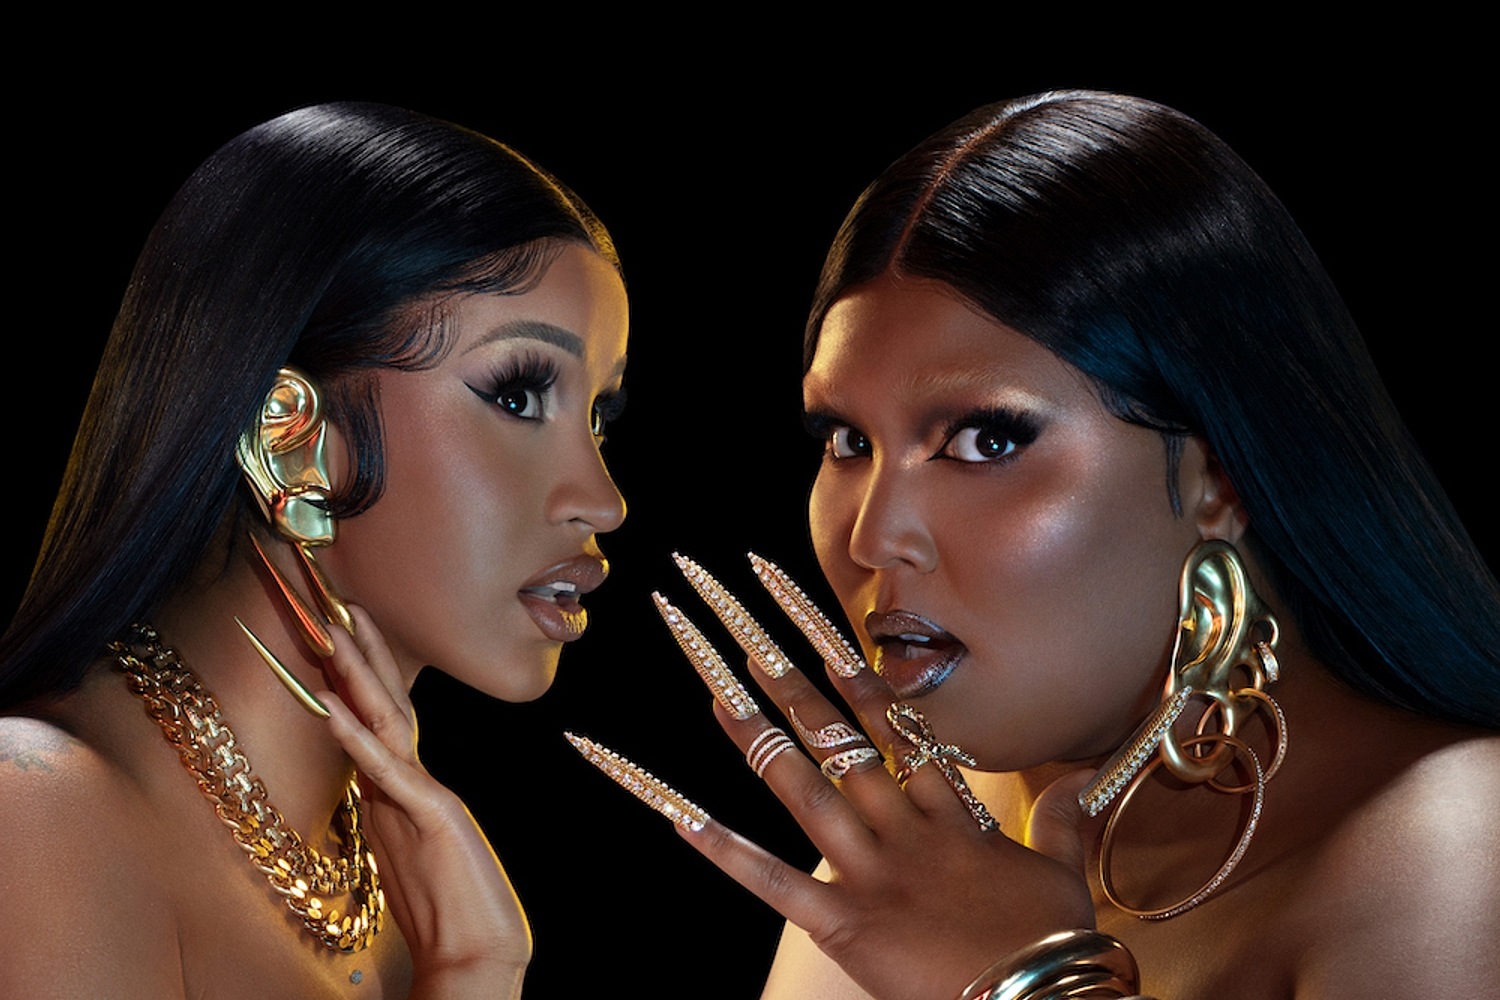 Tracks: Lizzo ft Cardi B, Frank Carter & the Rattlesnakes, Katy B and more